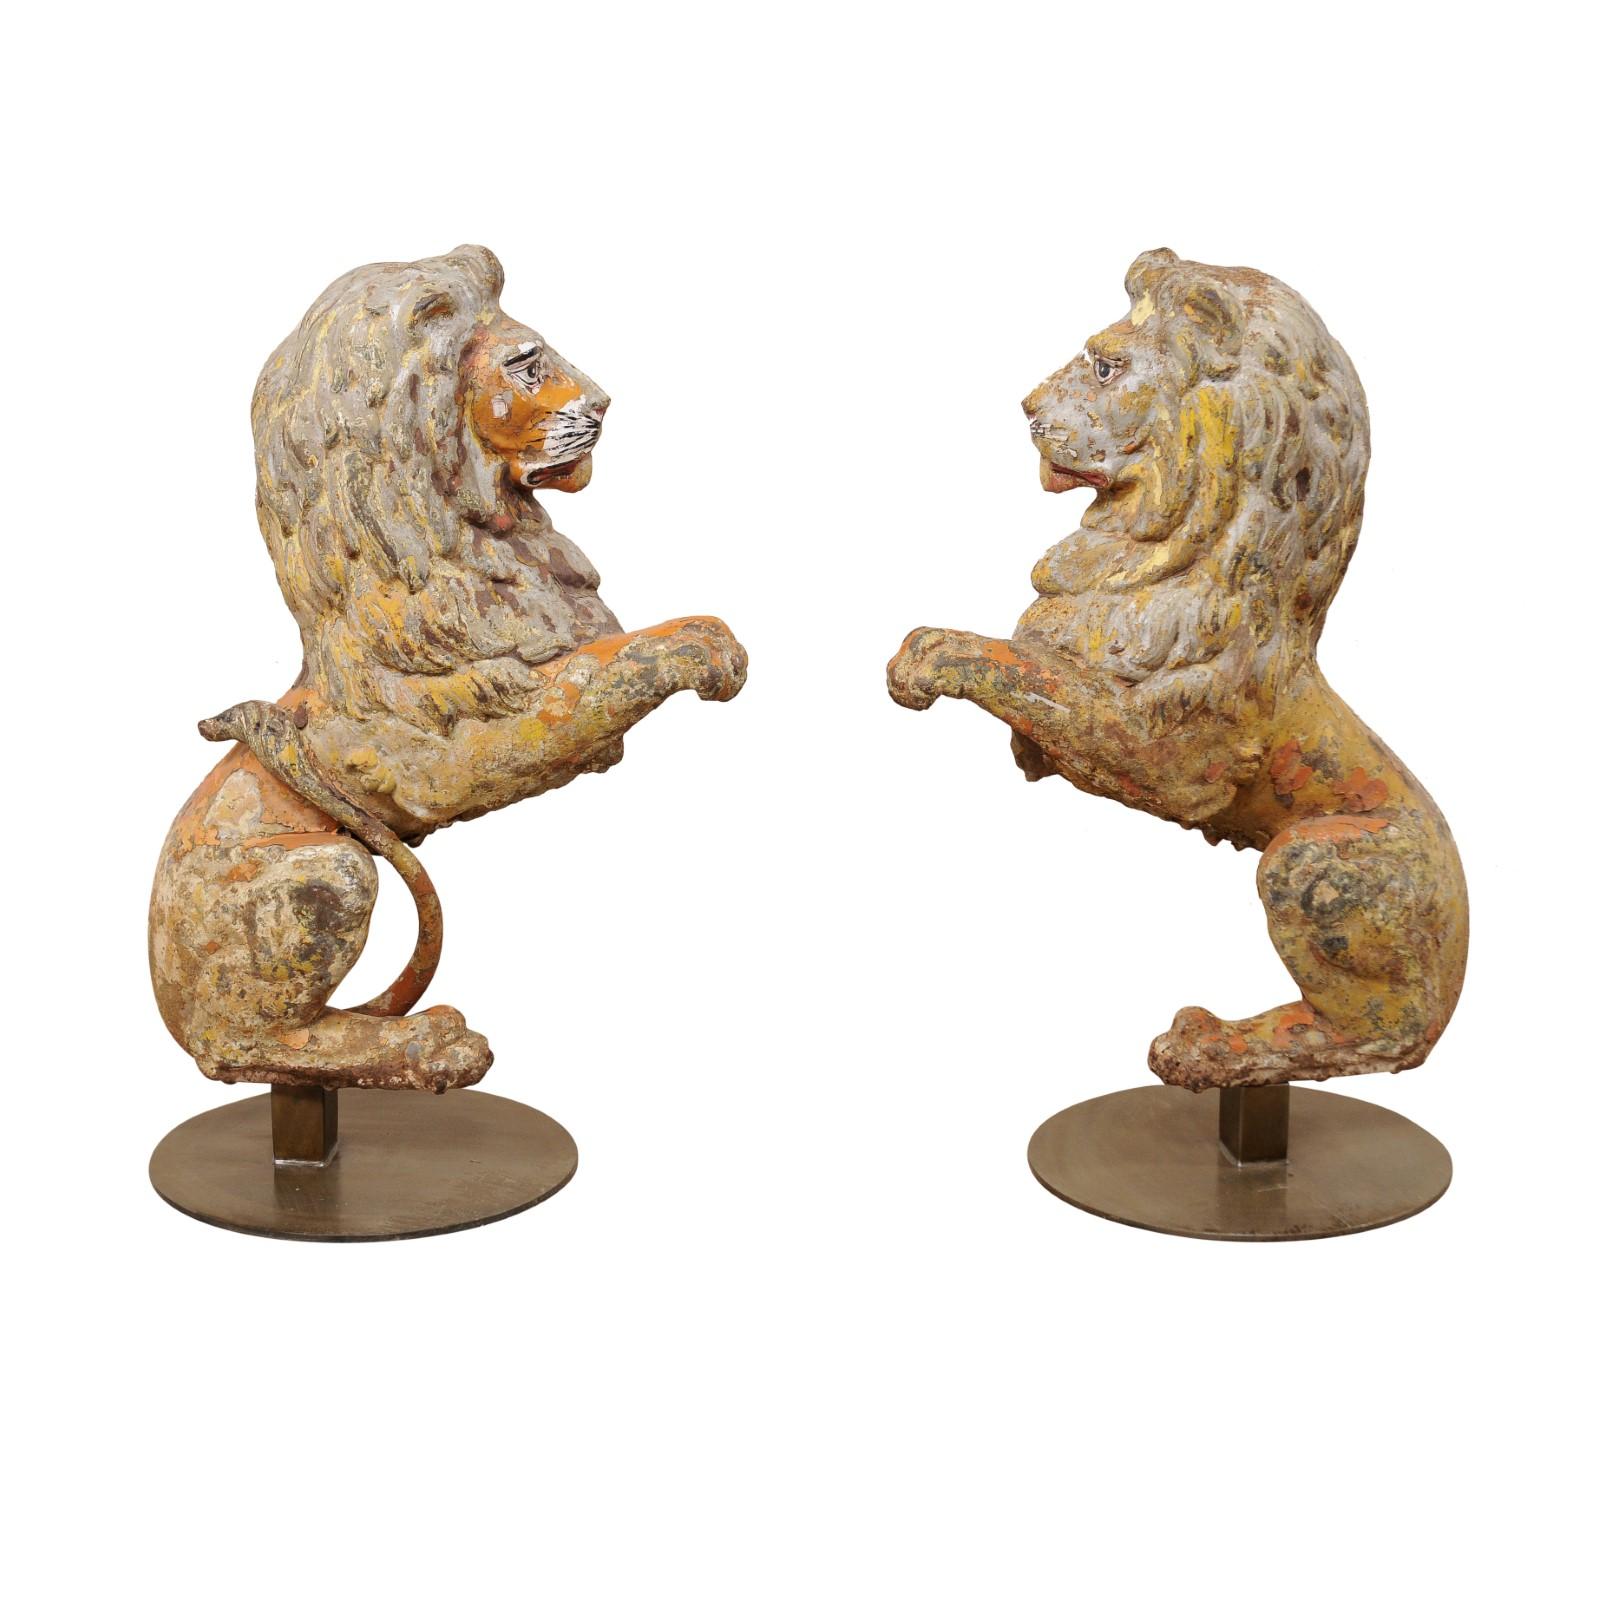 Pair of 19th Century English Cast-Iron Lion Statues, 3.5 Ft Tall 